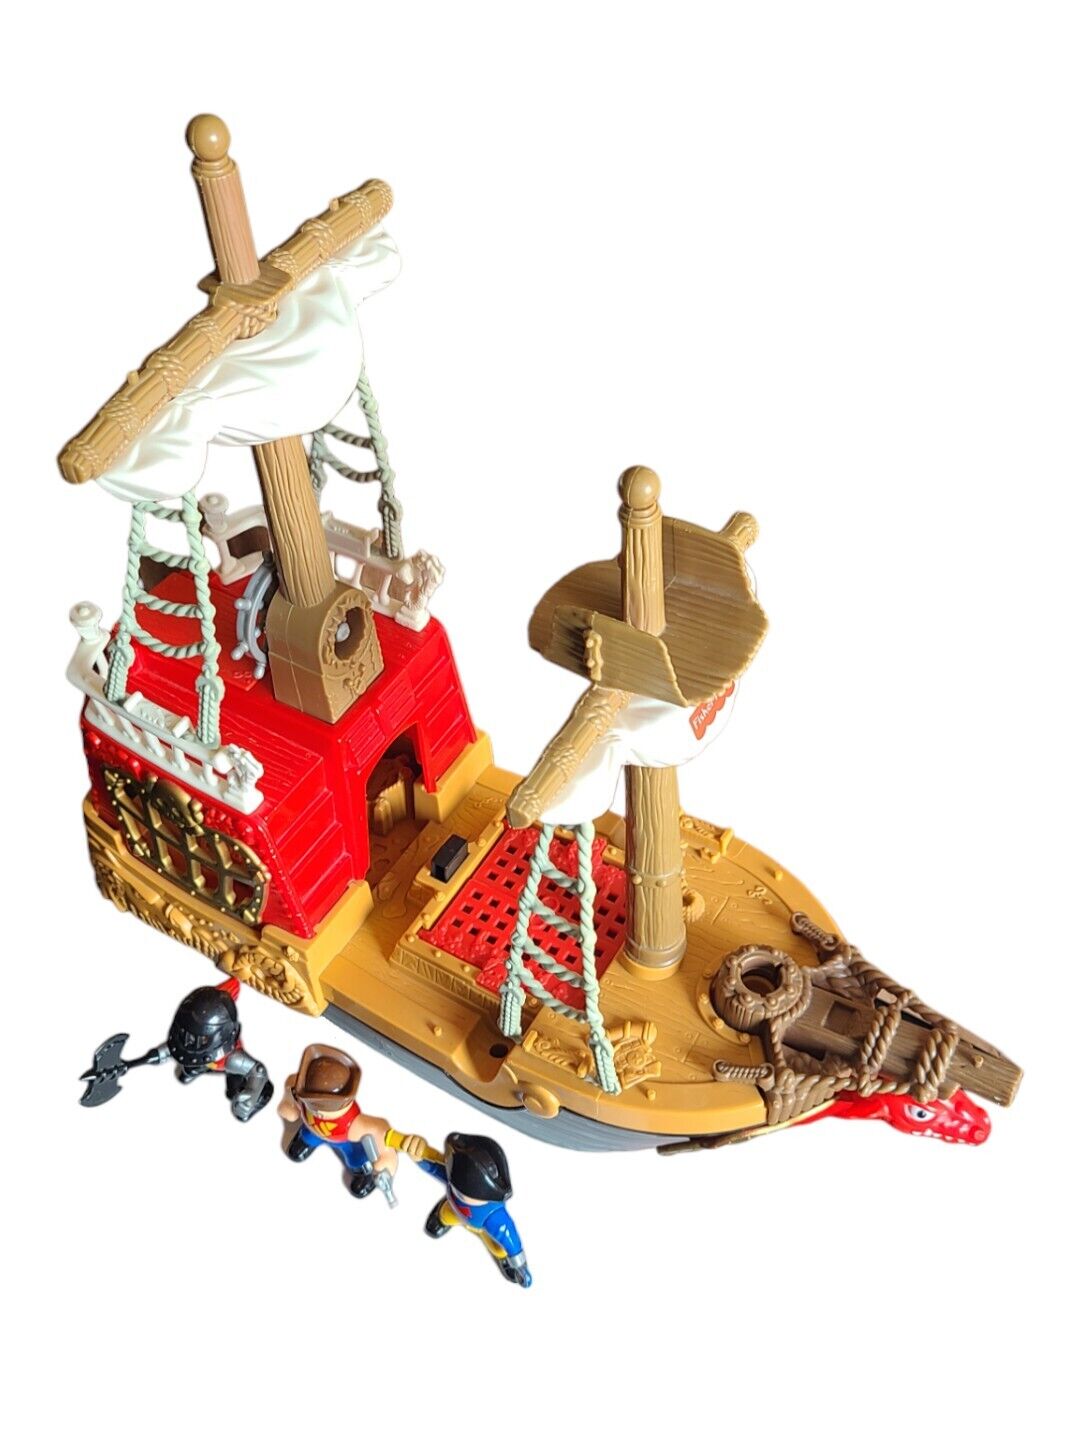 VTG FISHER PRICE 1994 GREAT ADVENTURES PIRATE SHIP